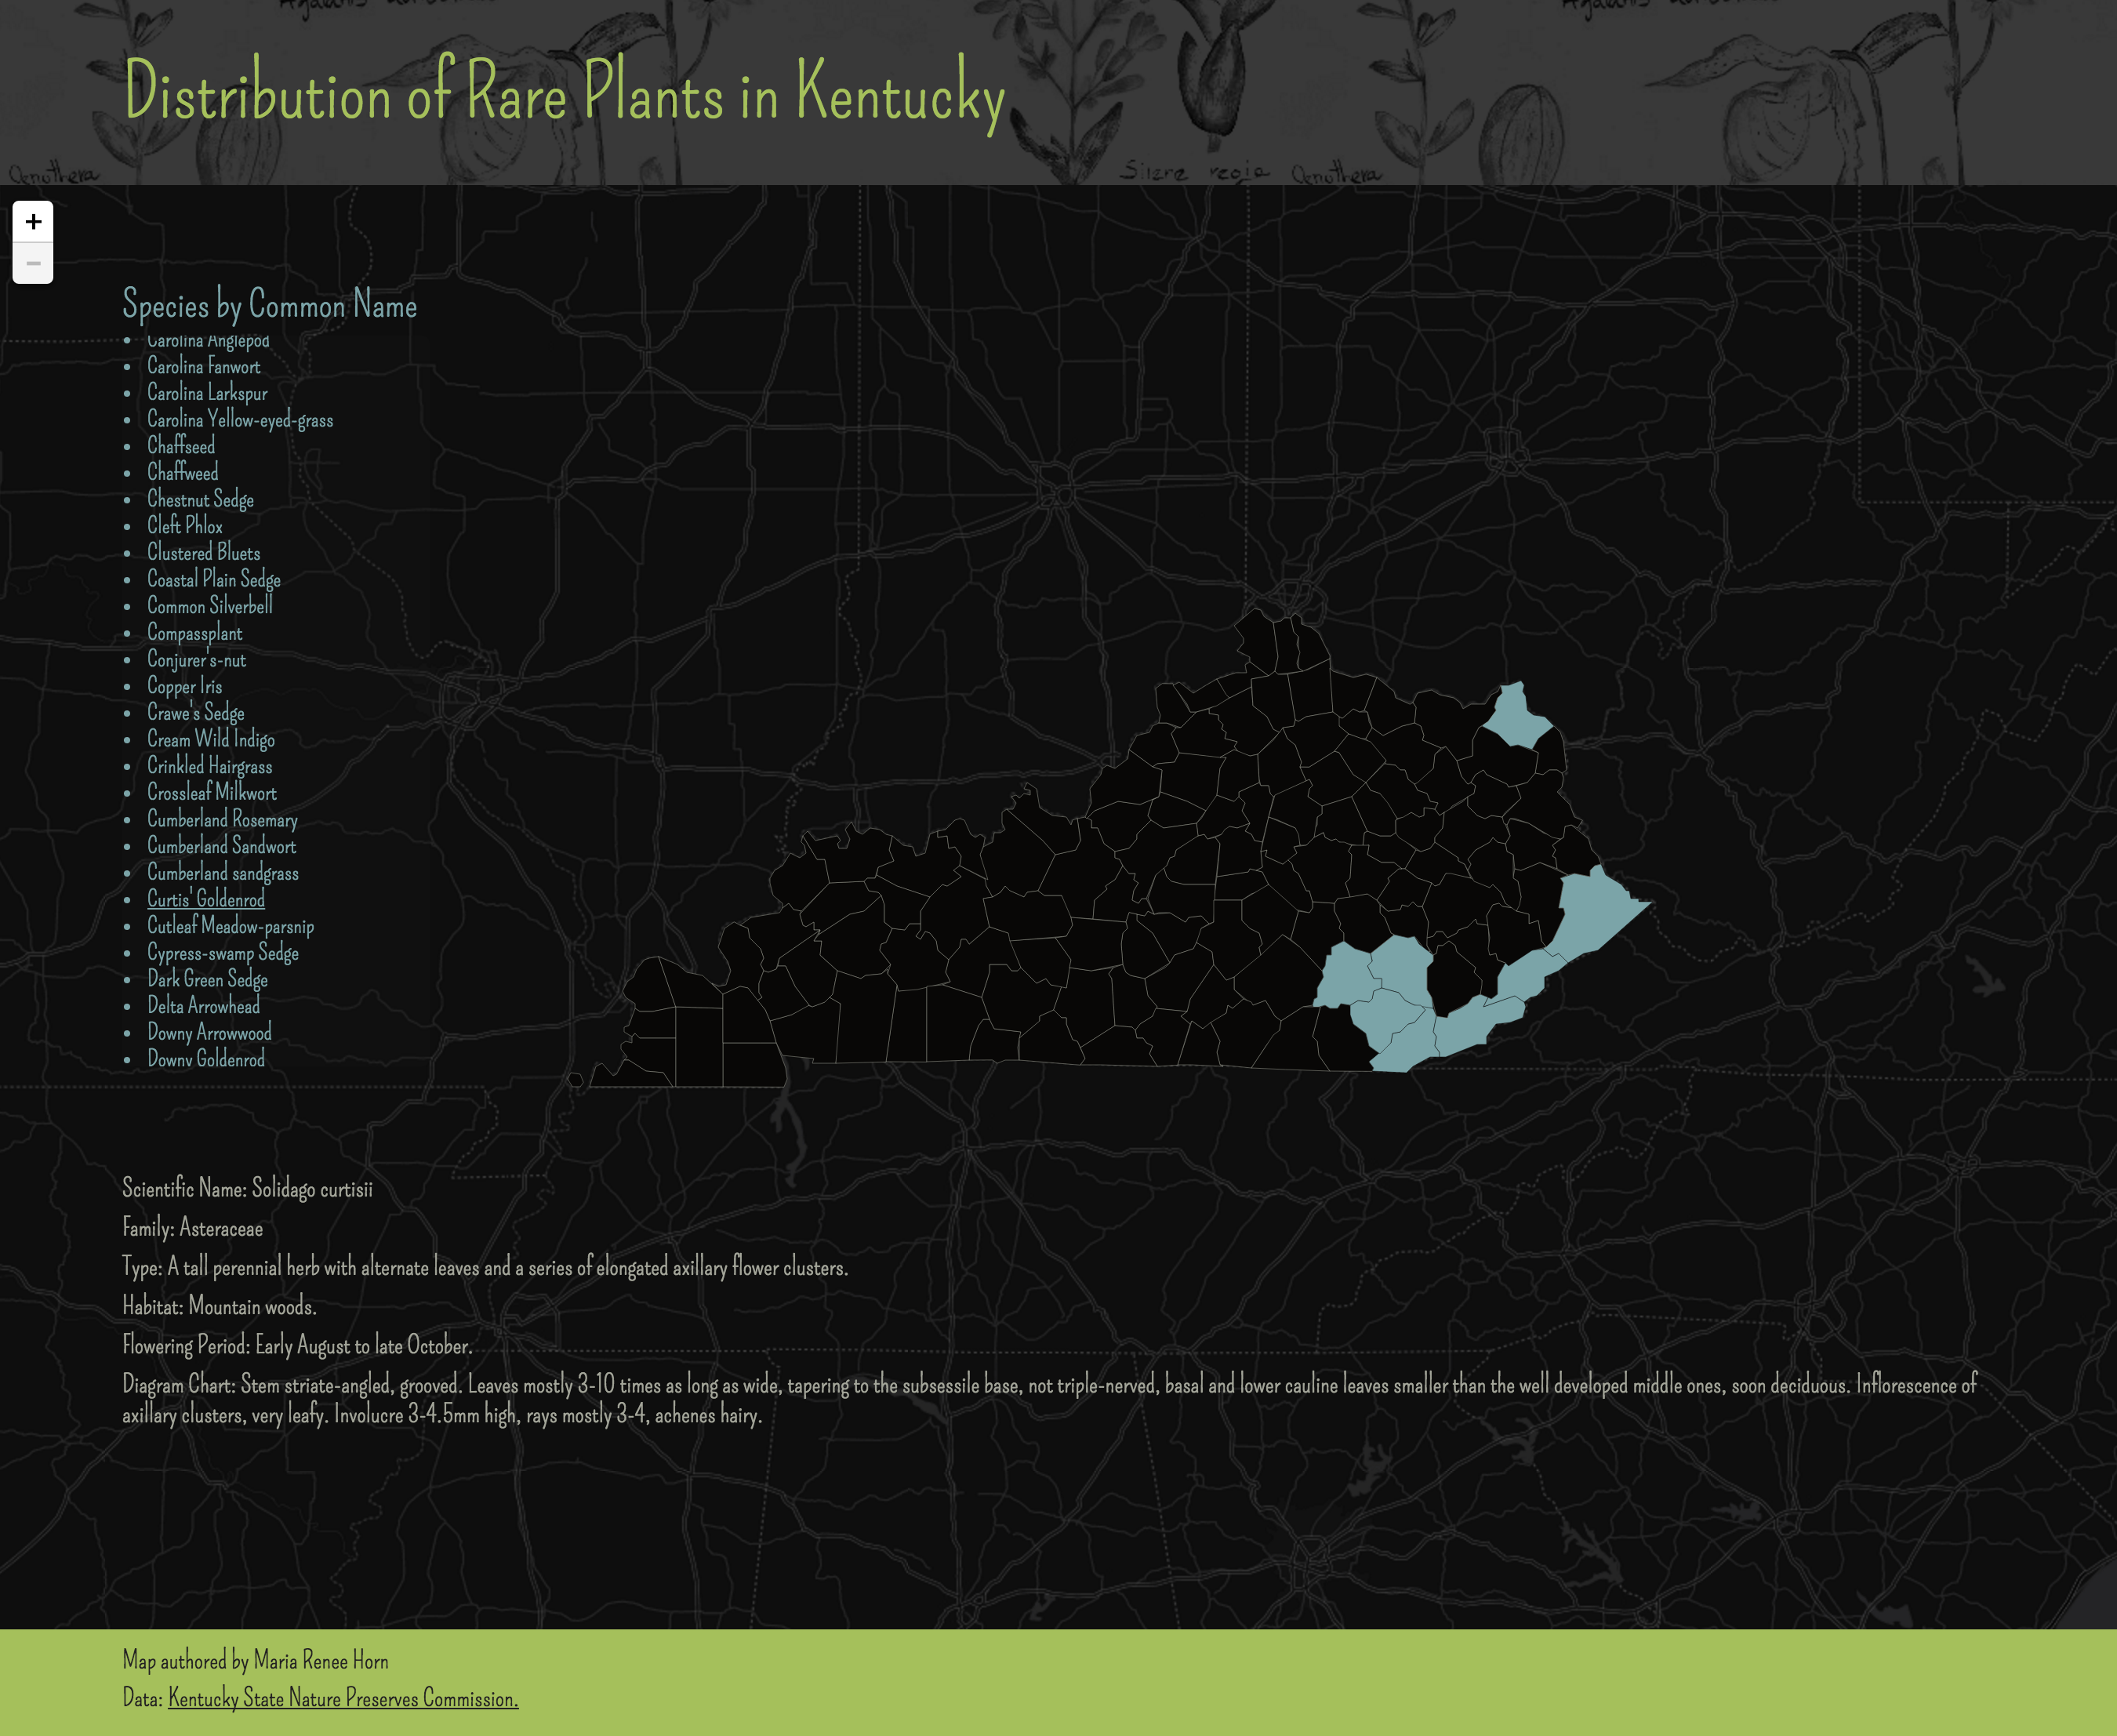 map of the distribution of rare plants in Kentucky